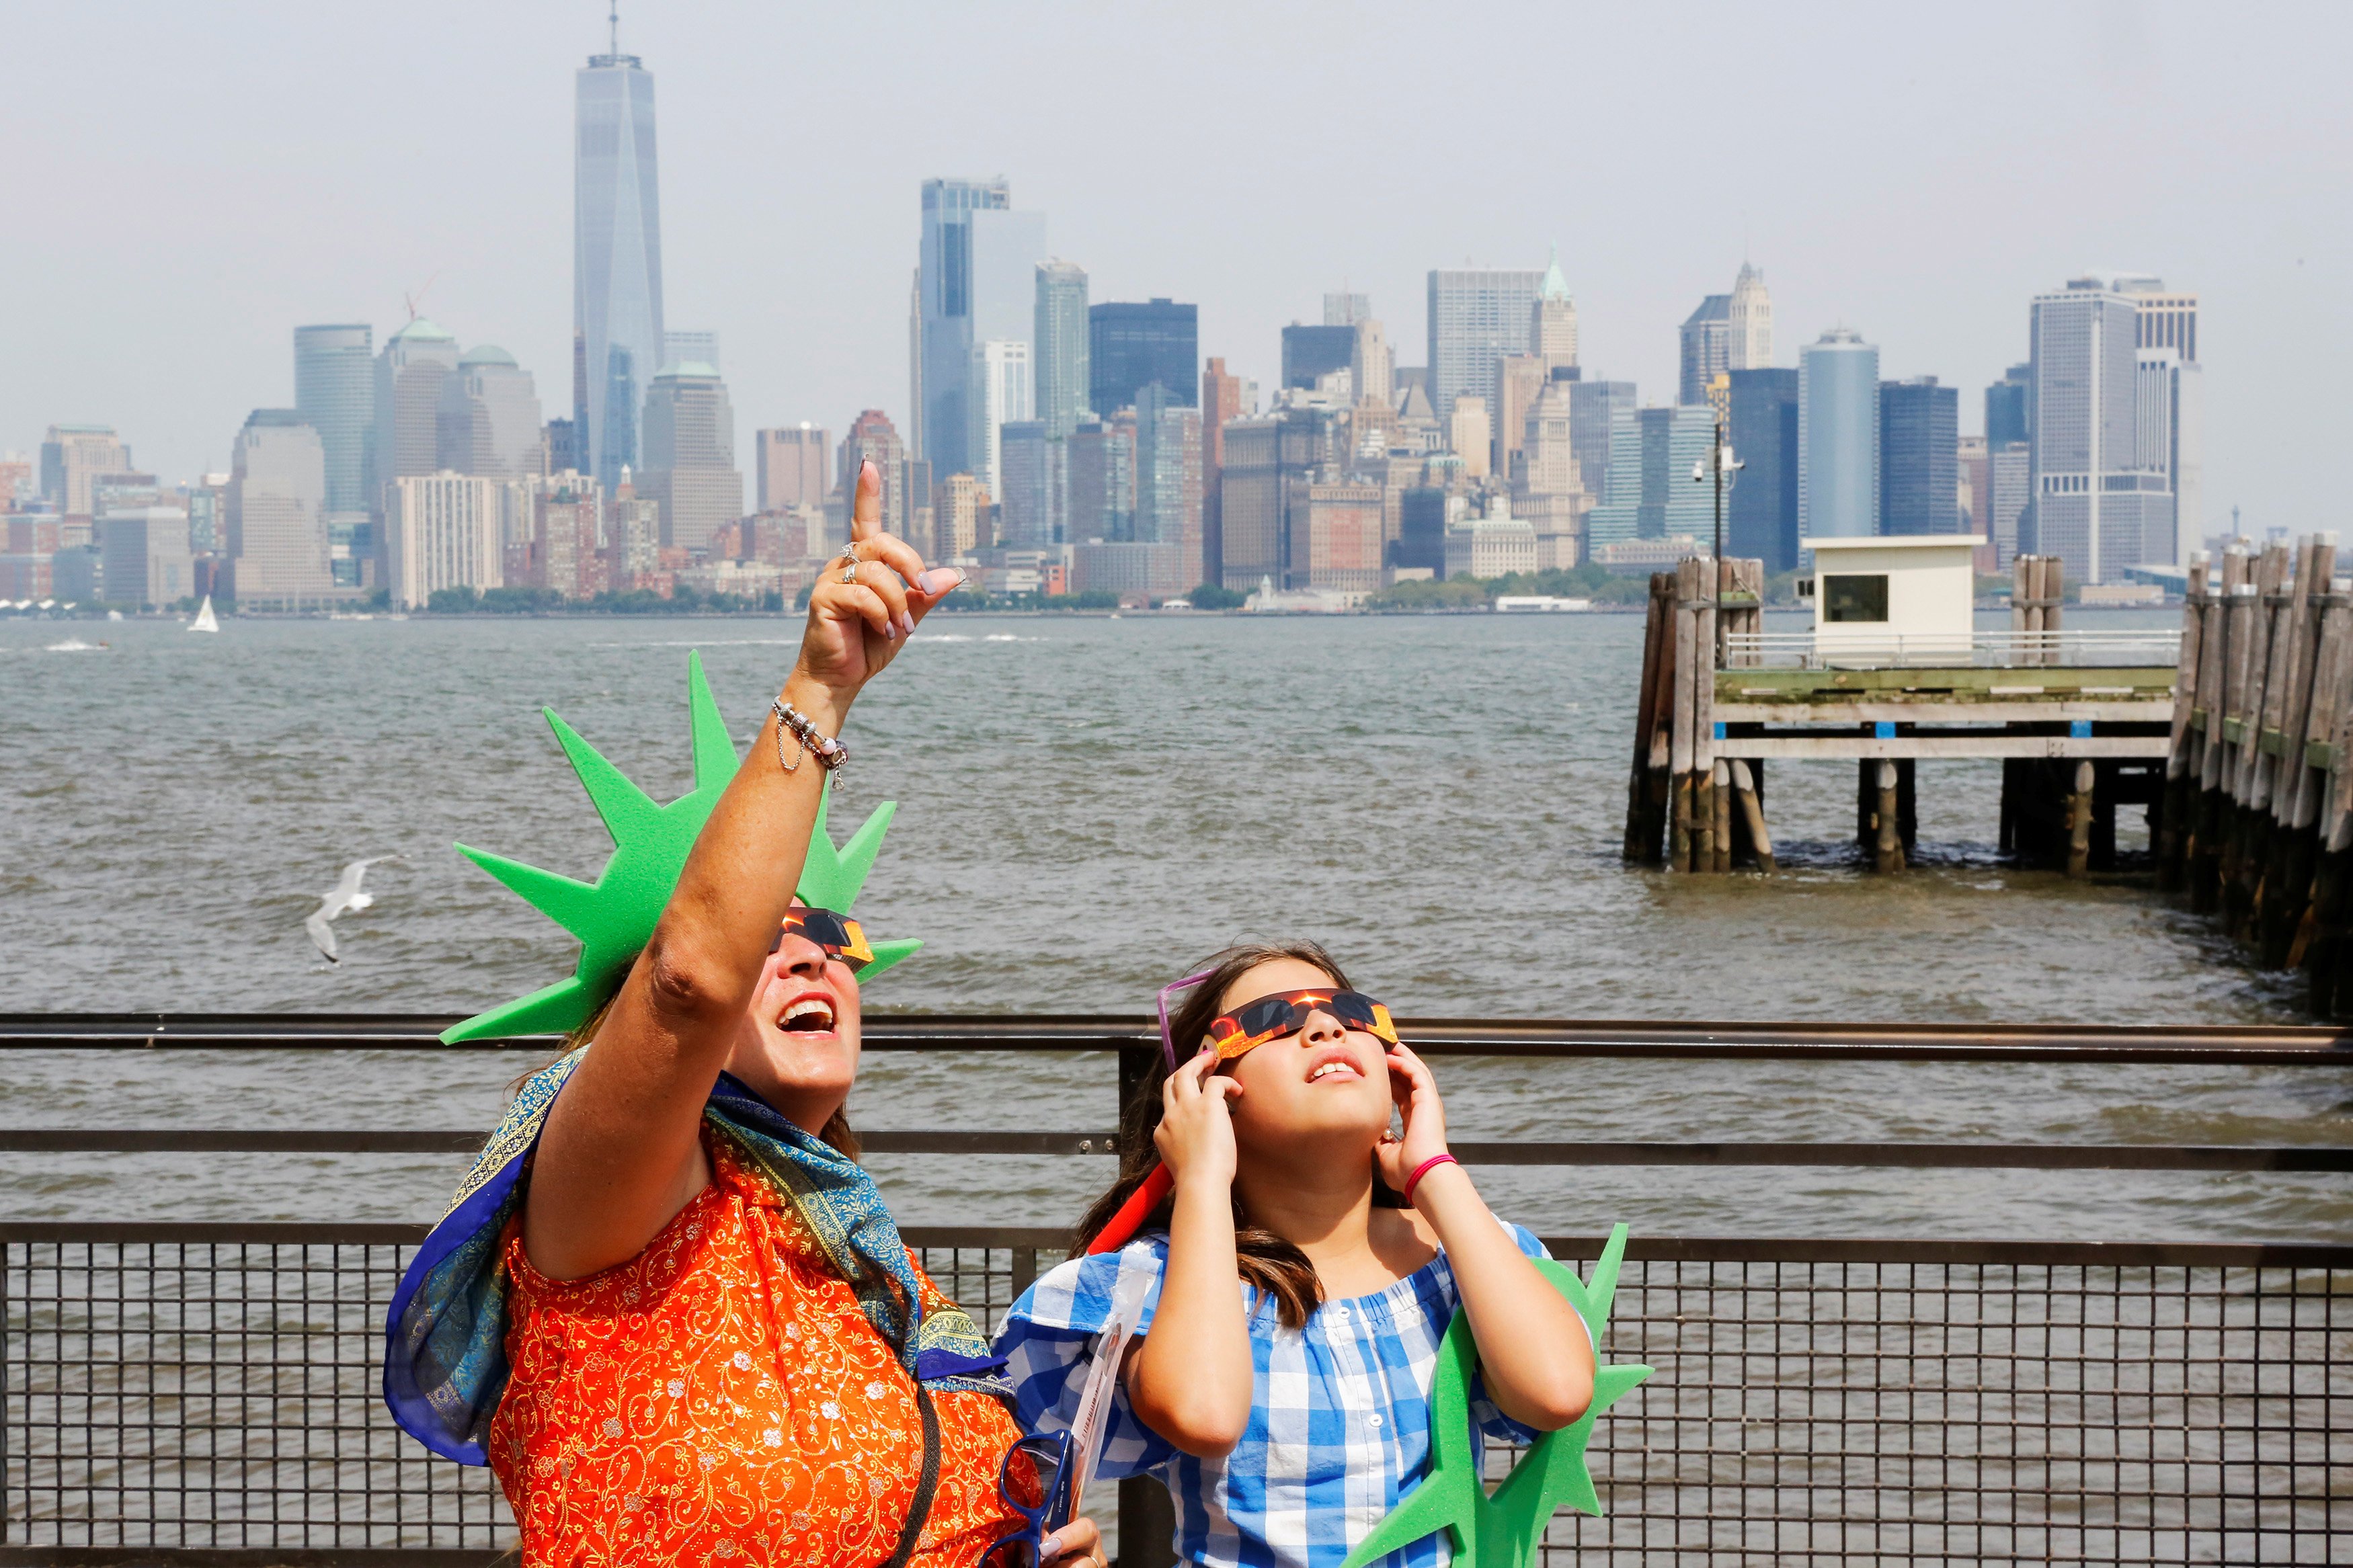 People view the solar eclipse at Liberty State Island as the Lower Manhattan and One World Trade center are seen in the background in New York, on Aug 21, 2017. (Eduardo Munoz—Reuters)